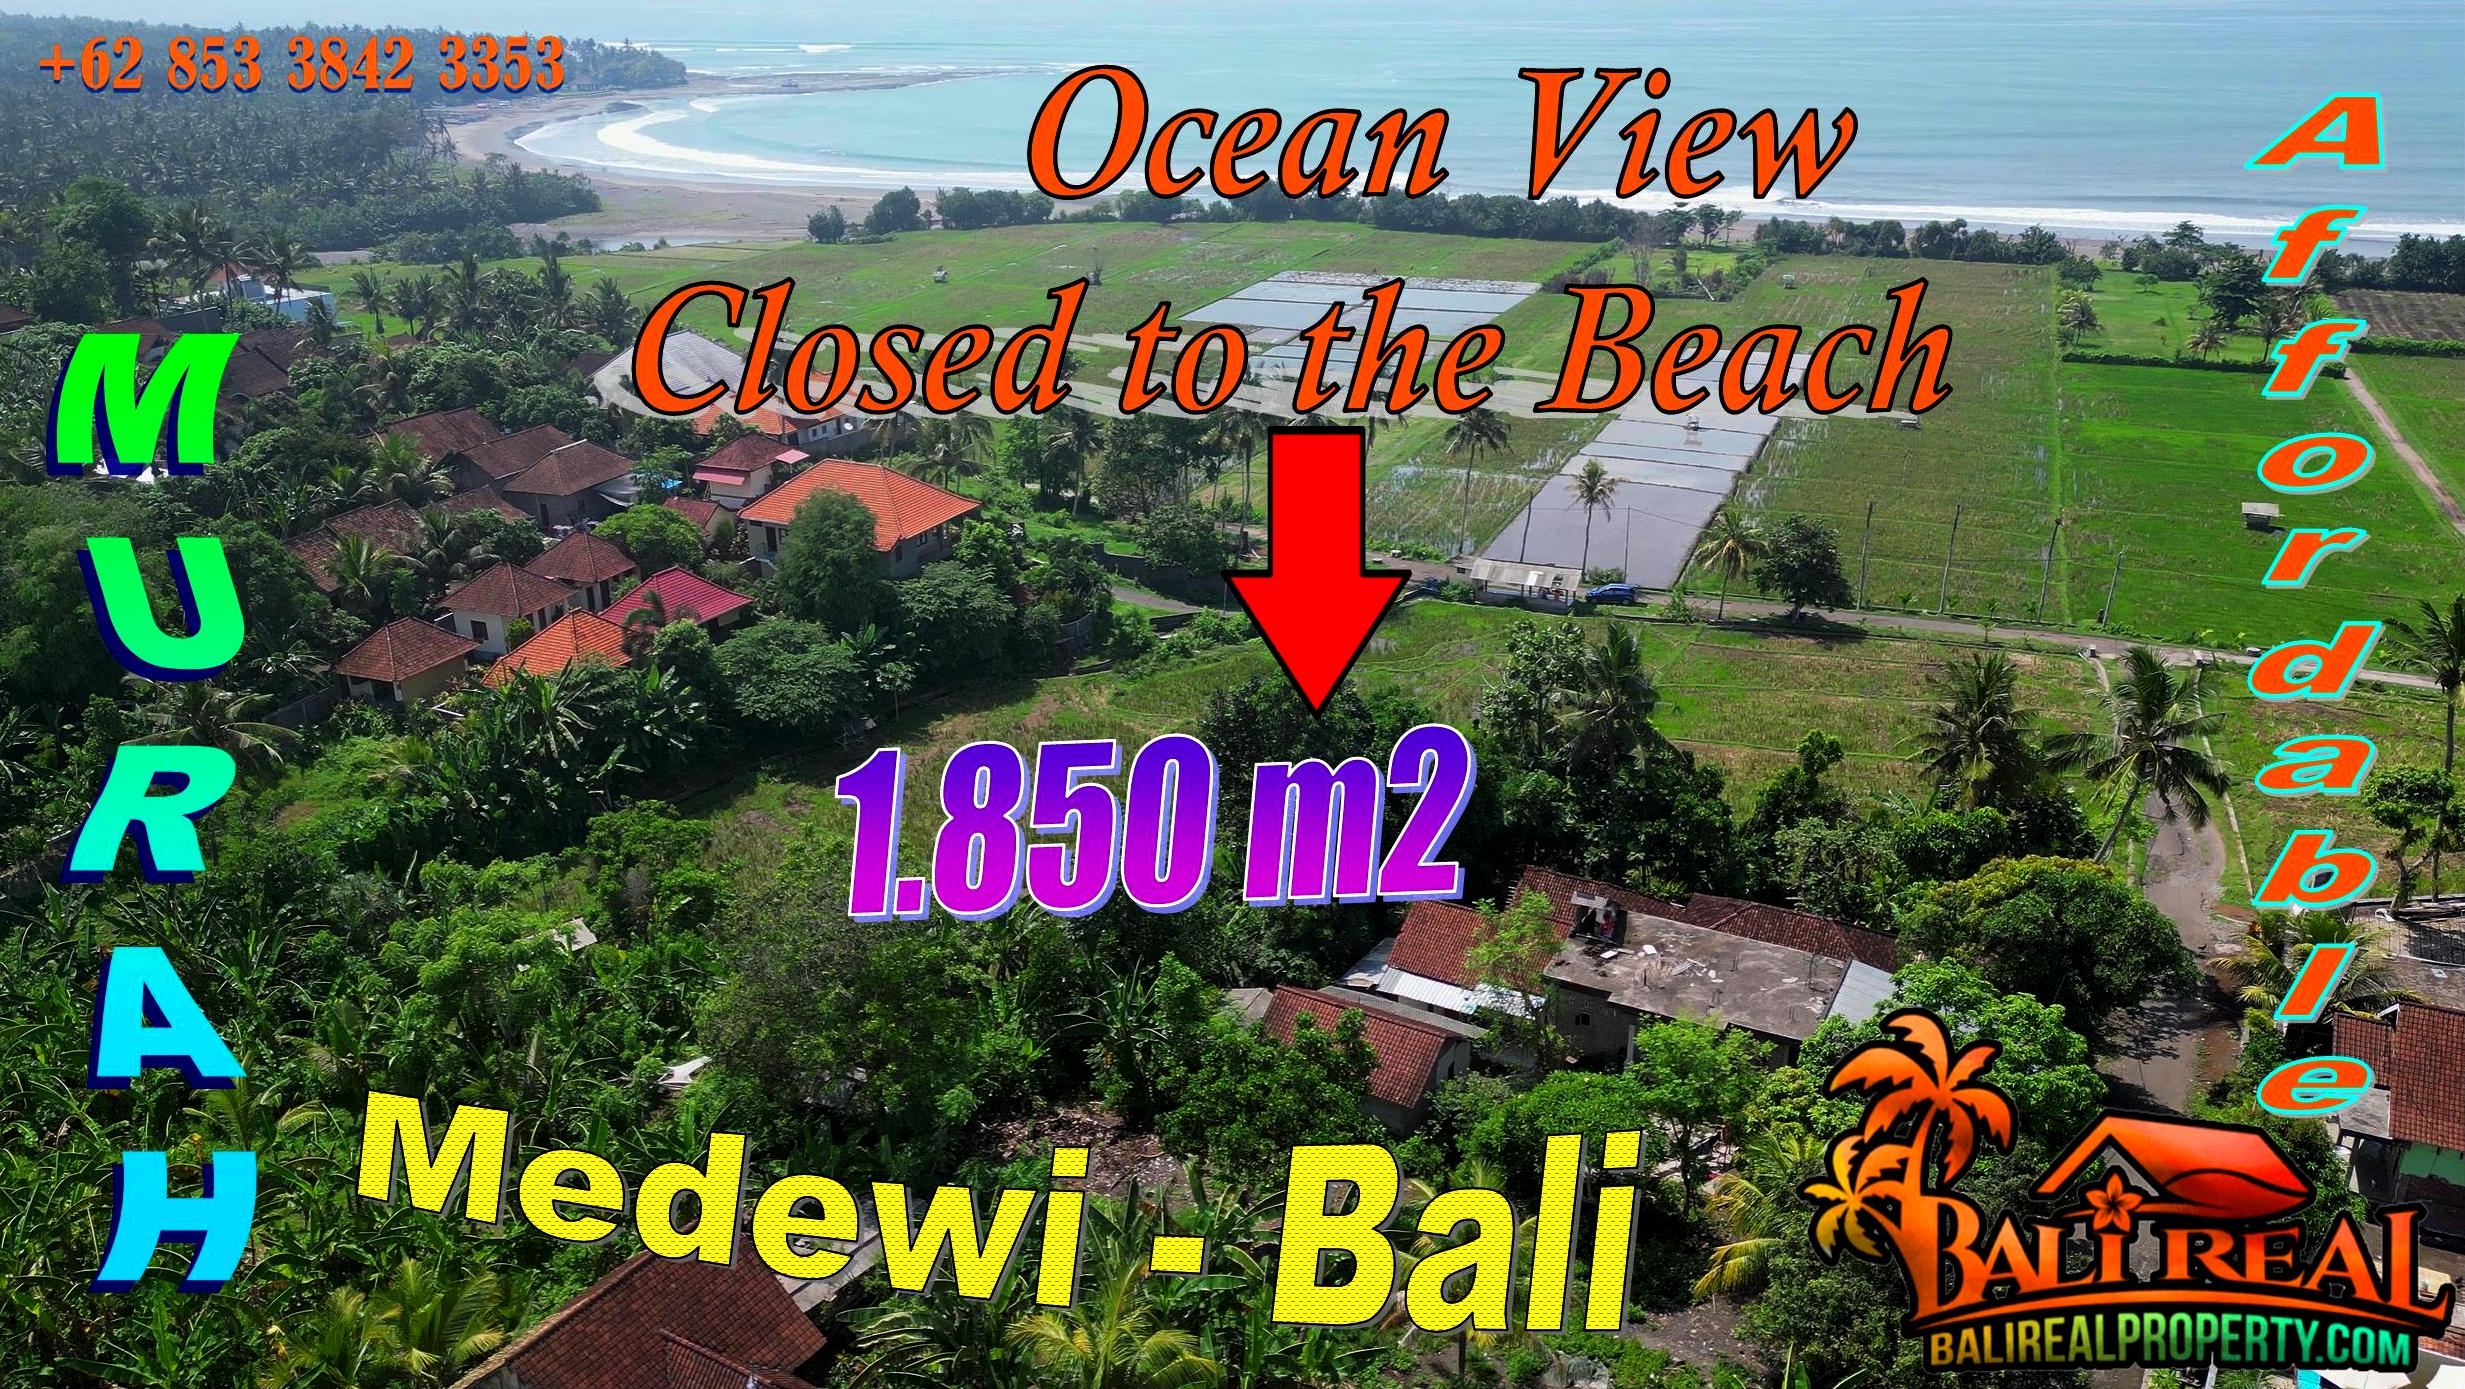 Affordable Ocean View Closed to the Beach Land for sale in Bali - TJB2038